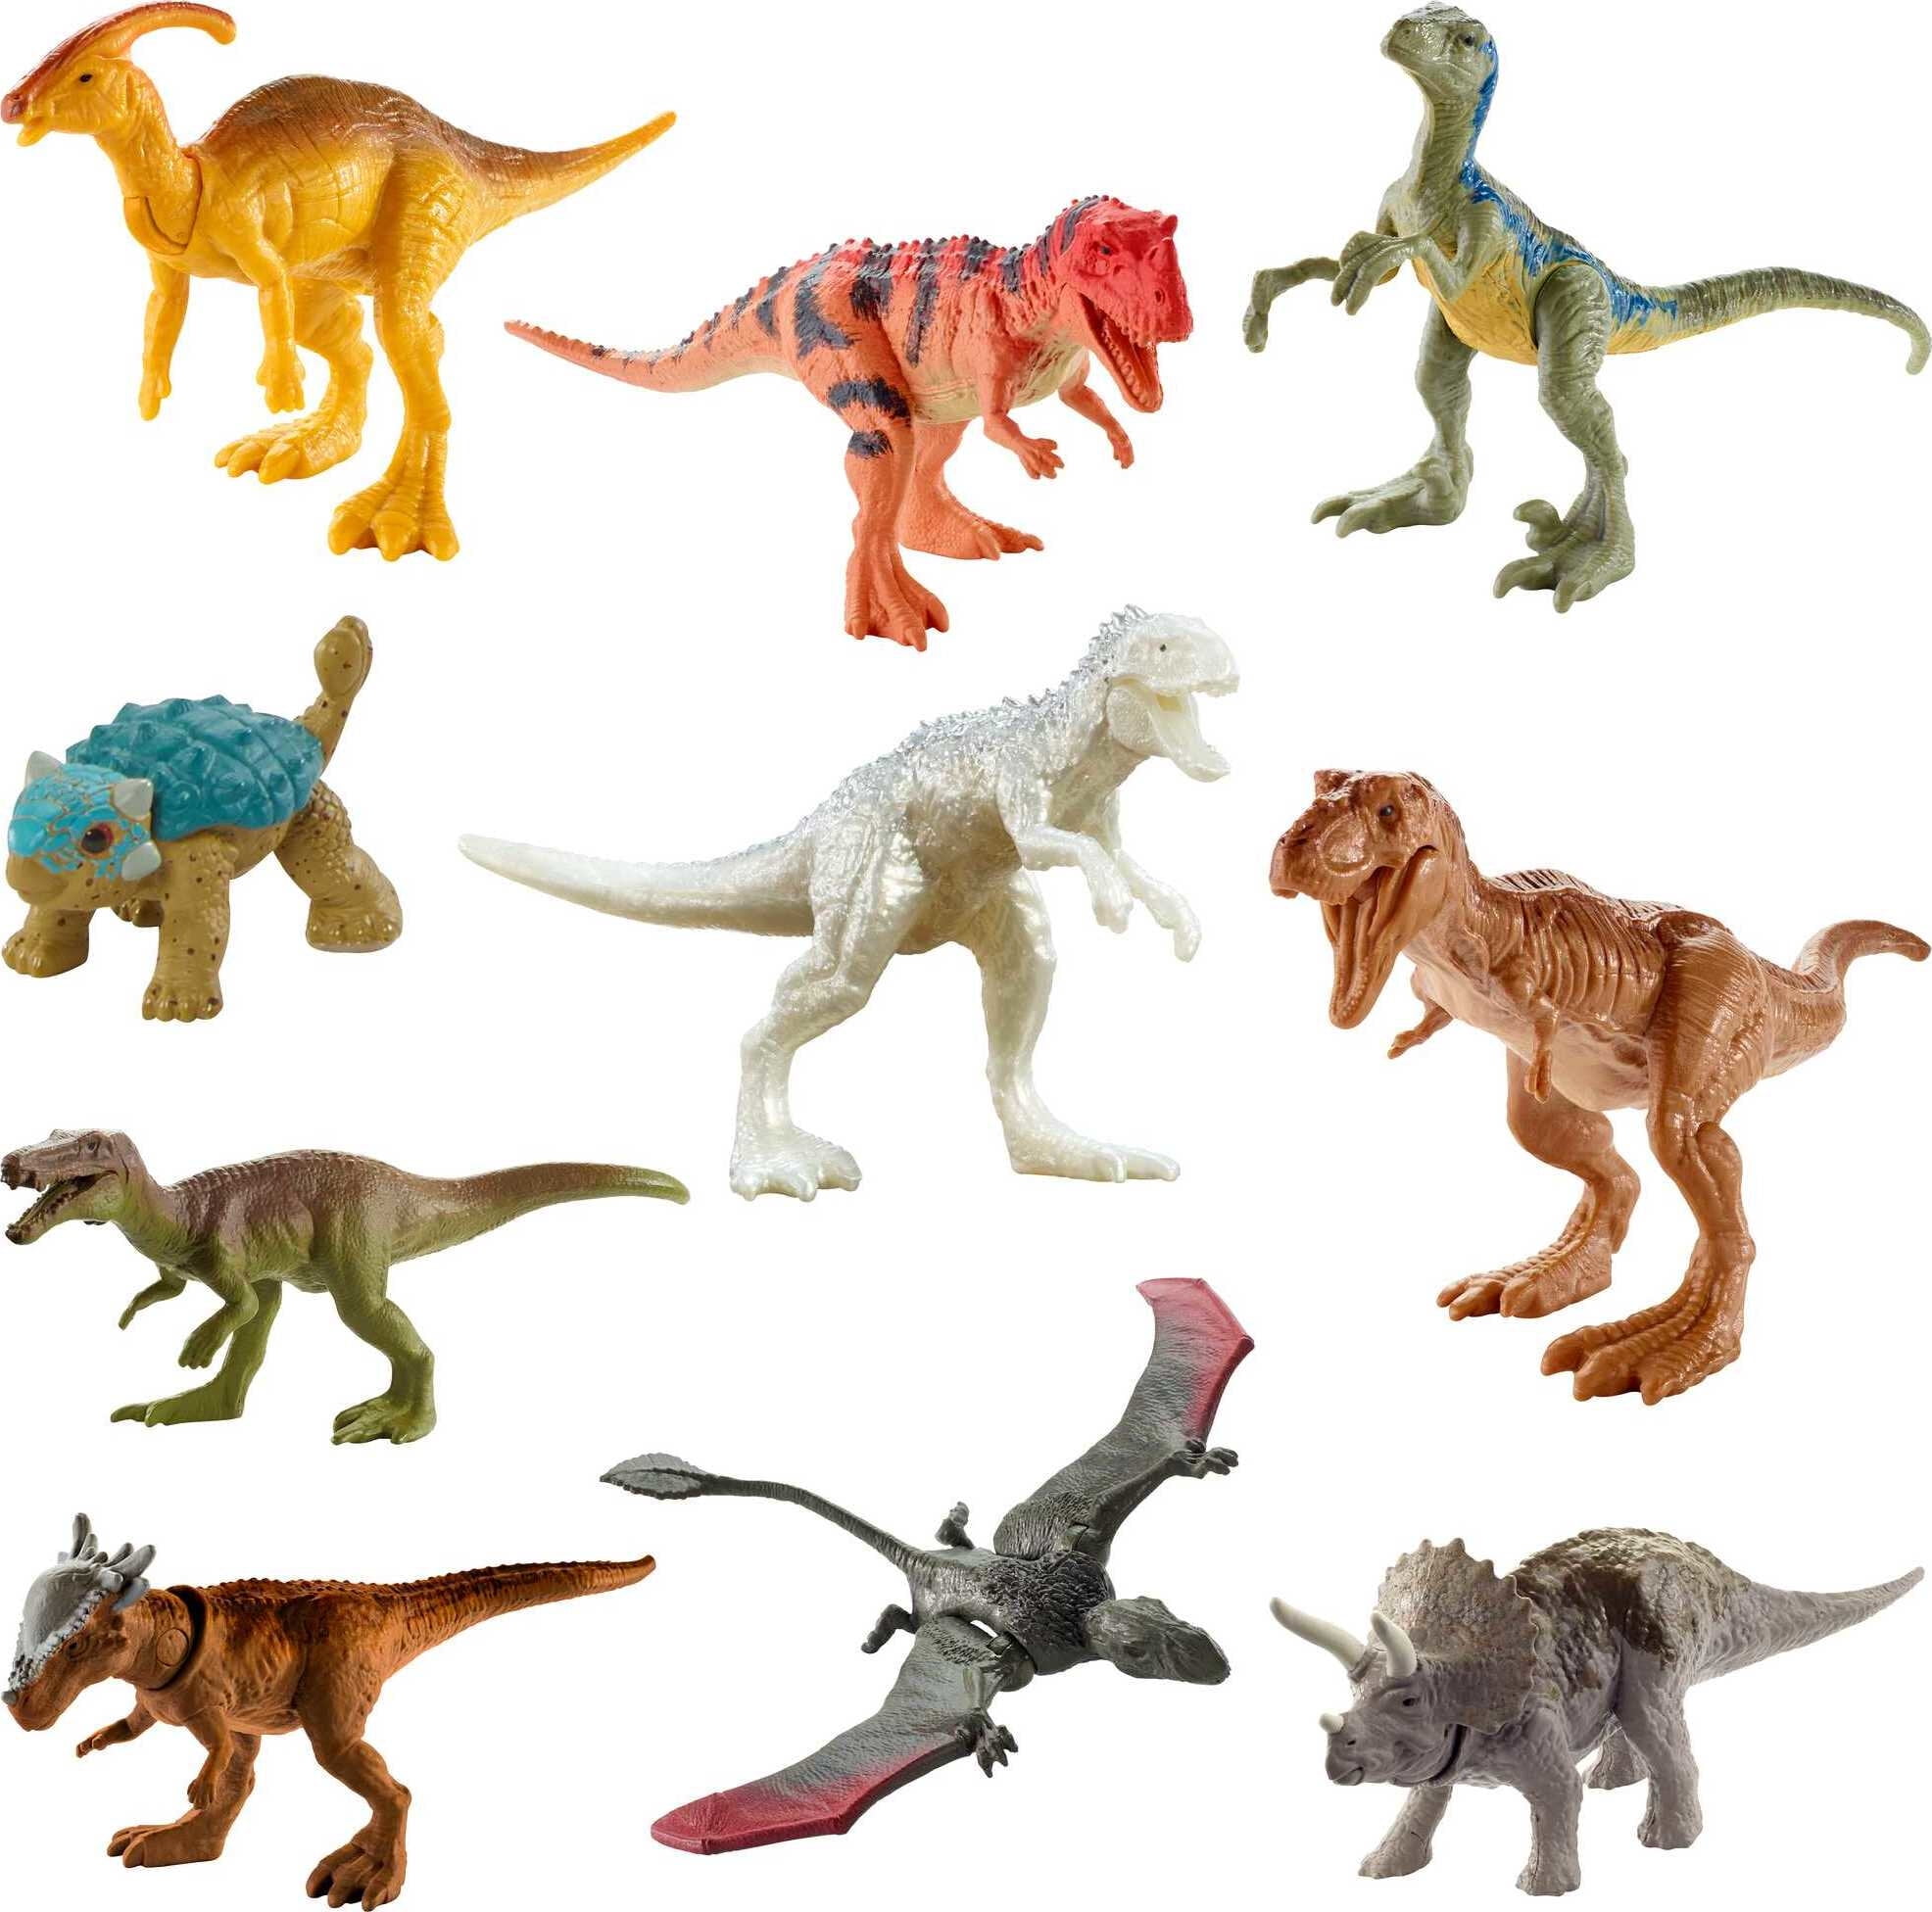 ToyVelt Dinosaur Play Set Dinosaur Toys Includes Dinosaur Figures, Trees,  Rocks, PlayMat, And A Beautiful Container Create a Dino World Great Gift  for Boys & Girls Ages 3,4,5,6, and Up UPDATED VERSION - Walmart.com